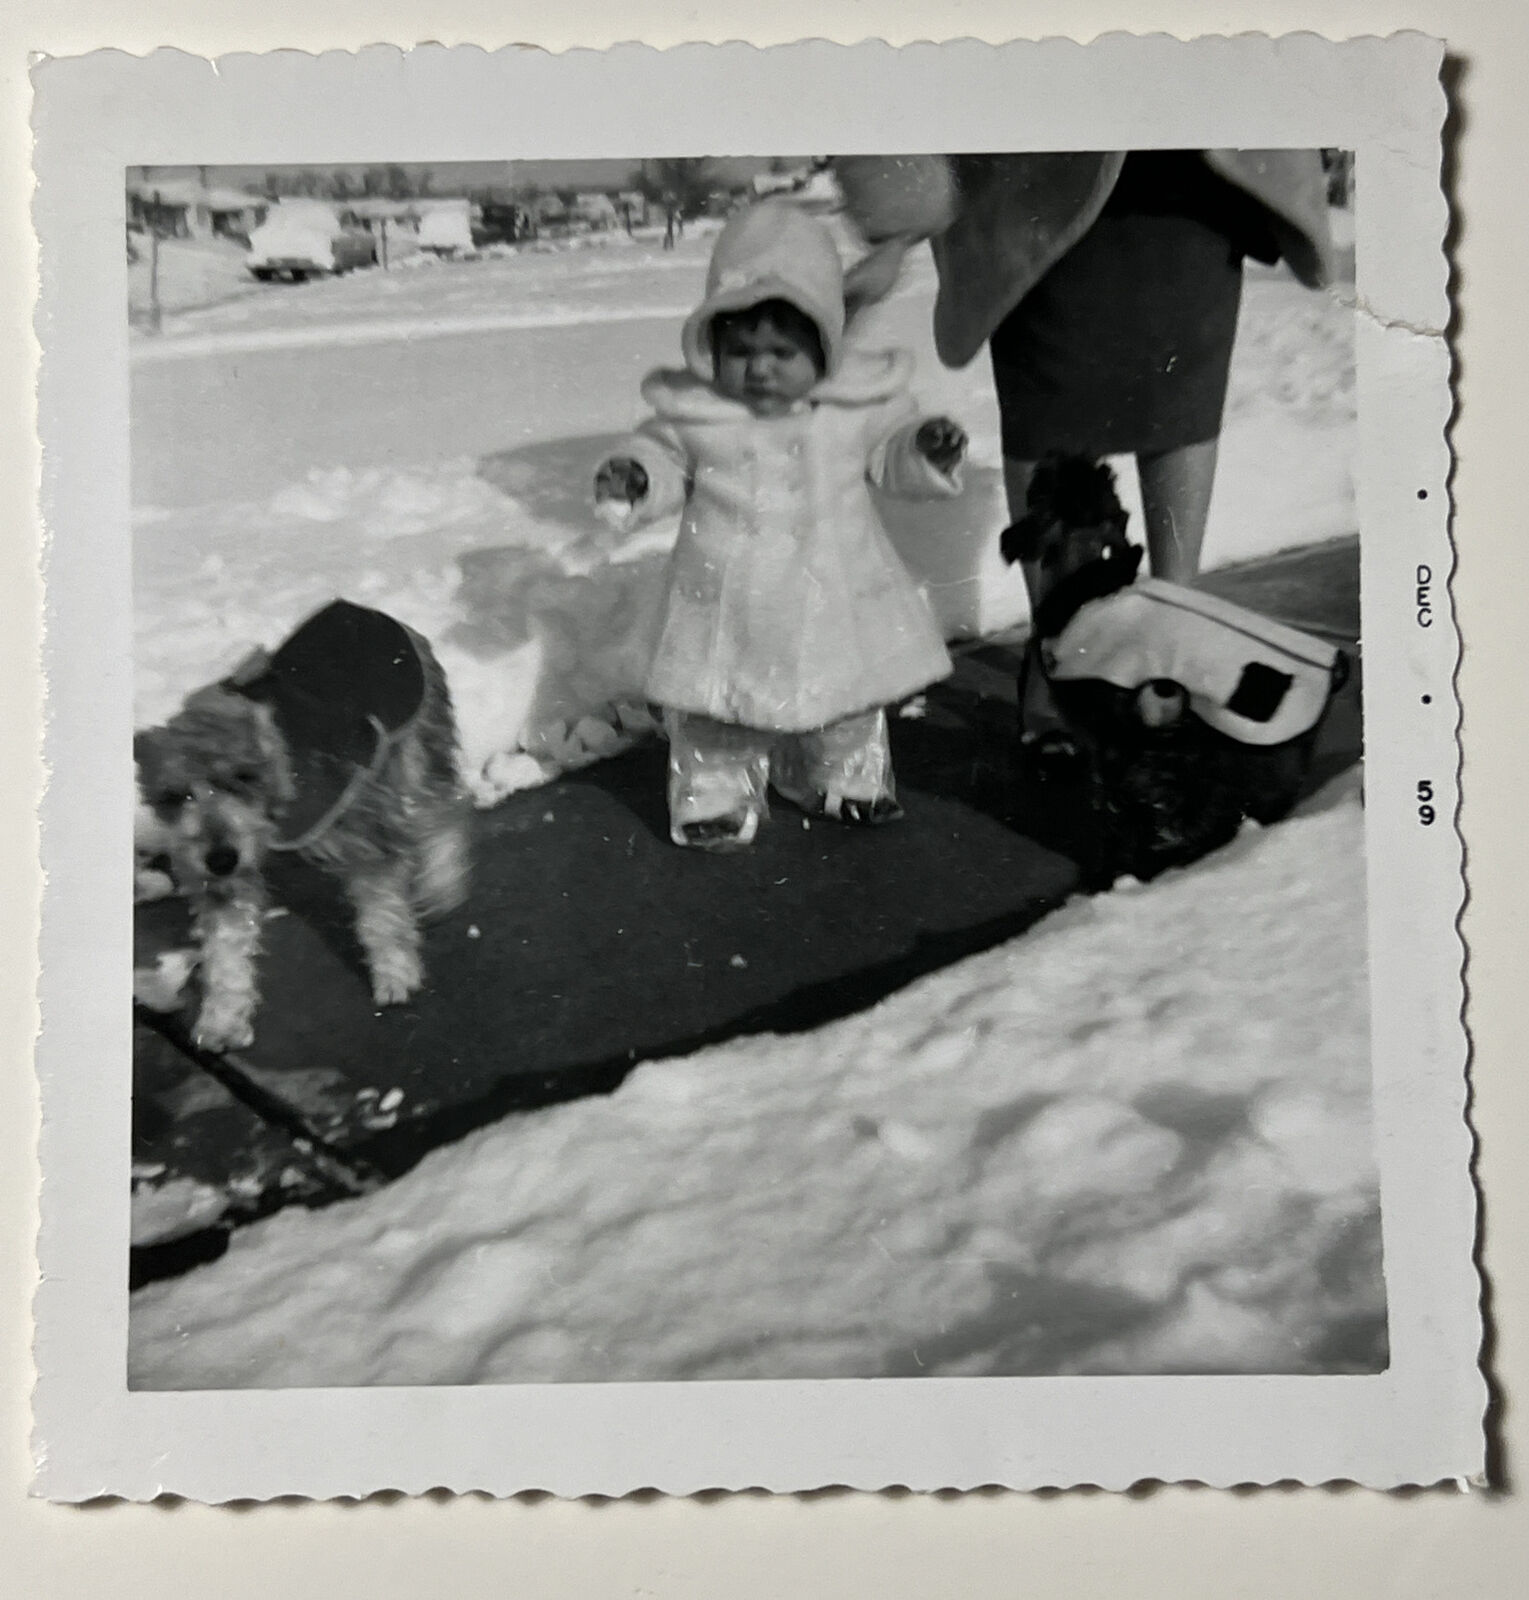 vintage 1959 Baby Toddler in SNOW w DOGS in JACKETS Snapshot Photo